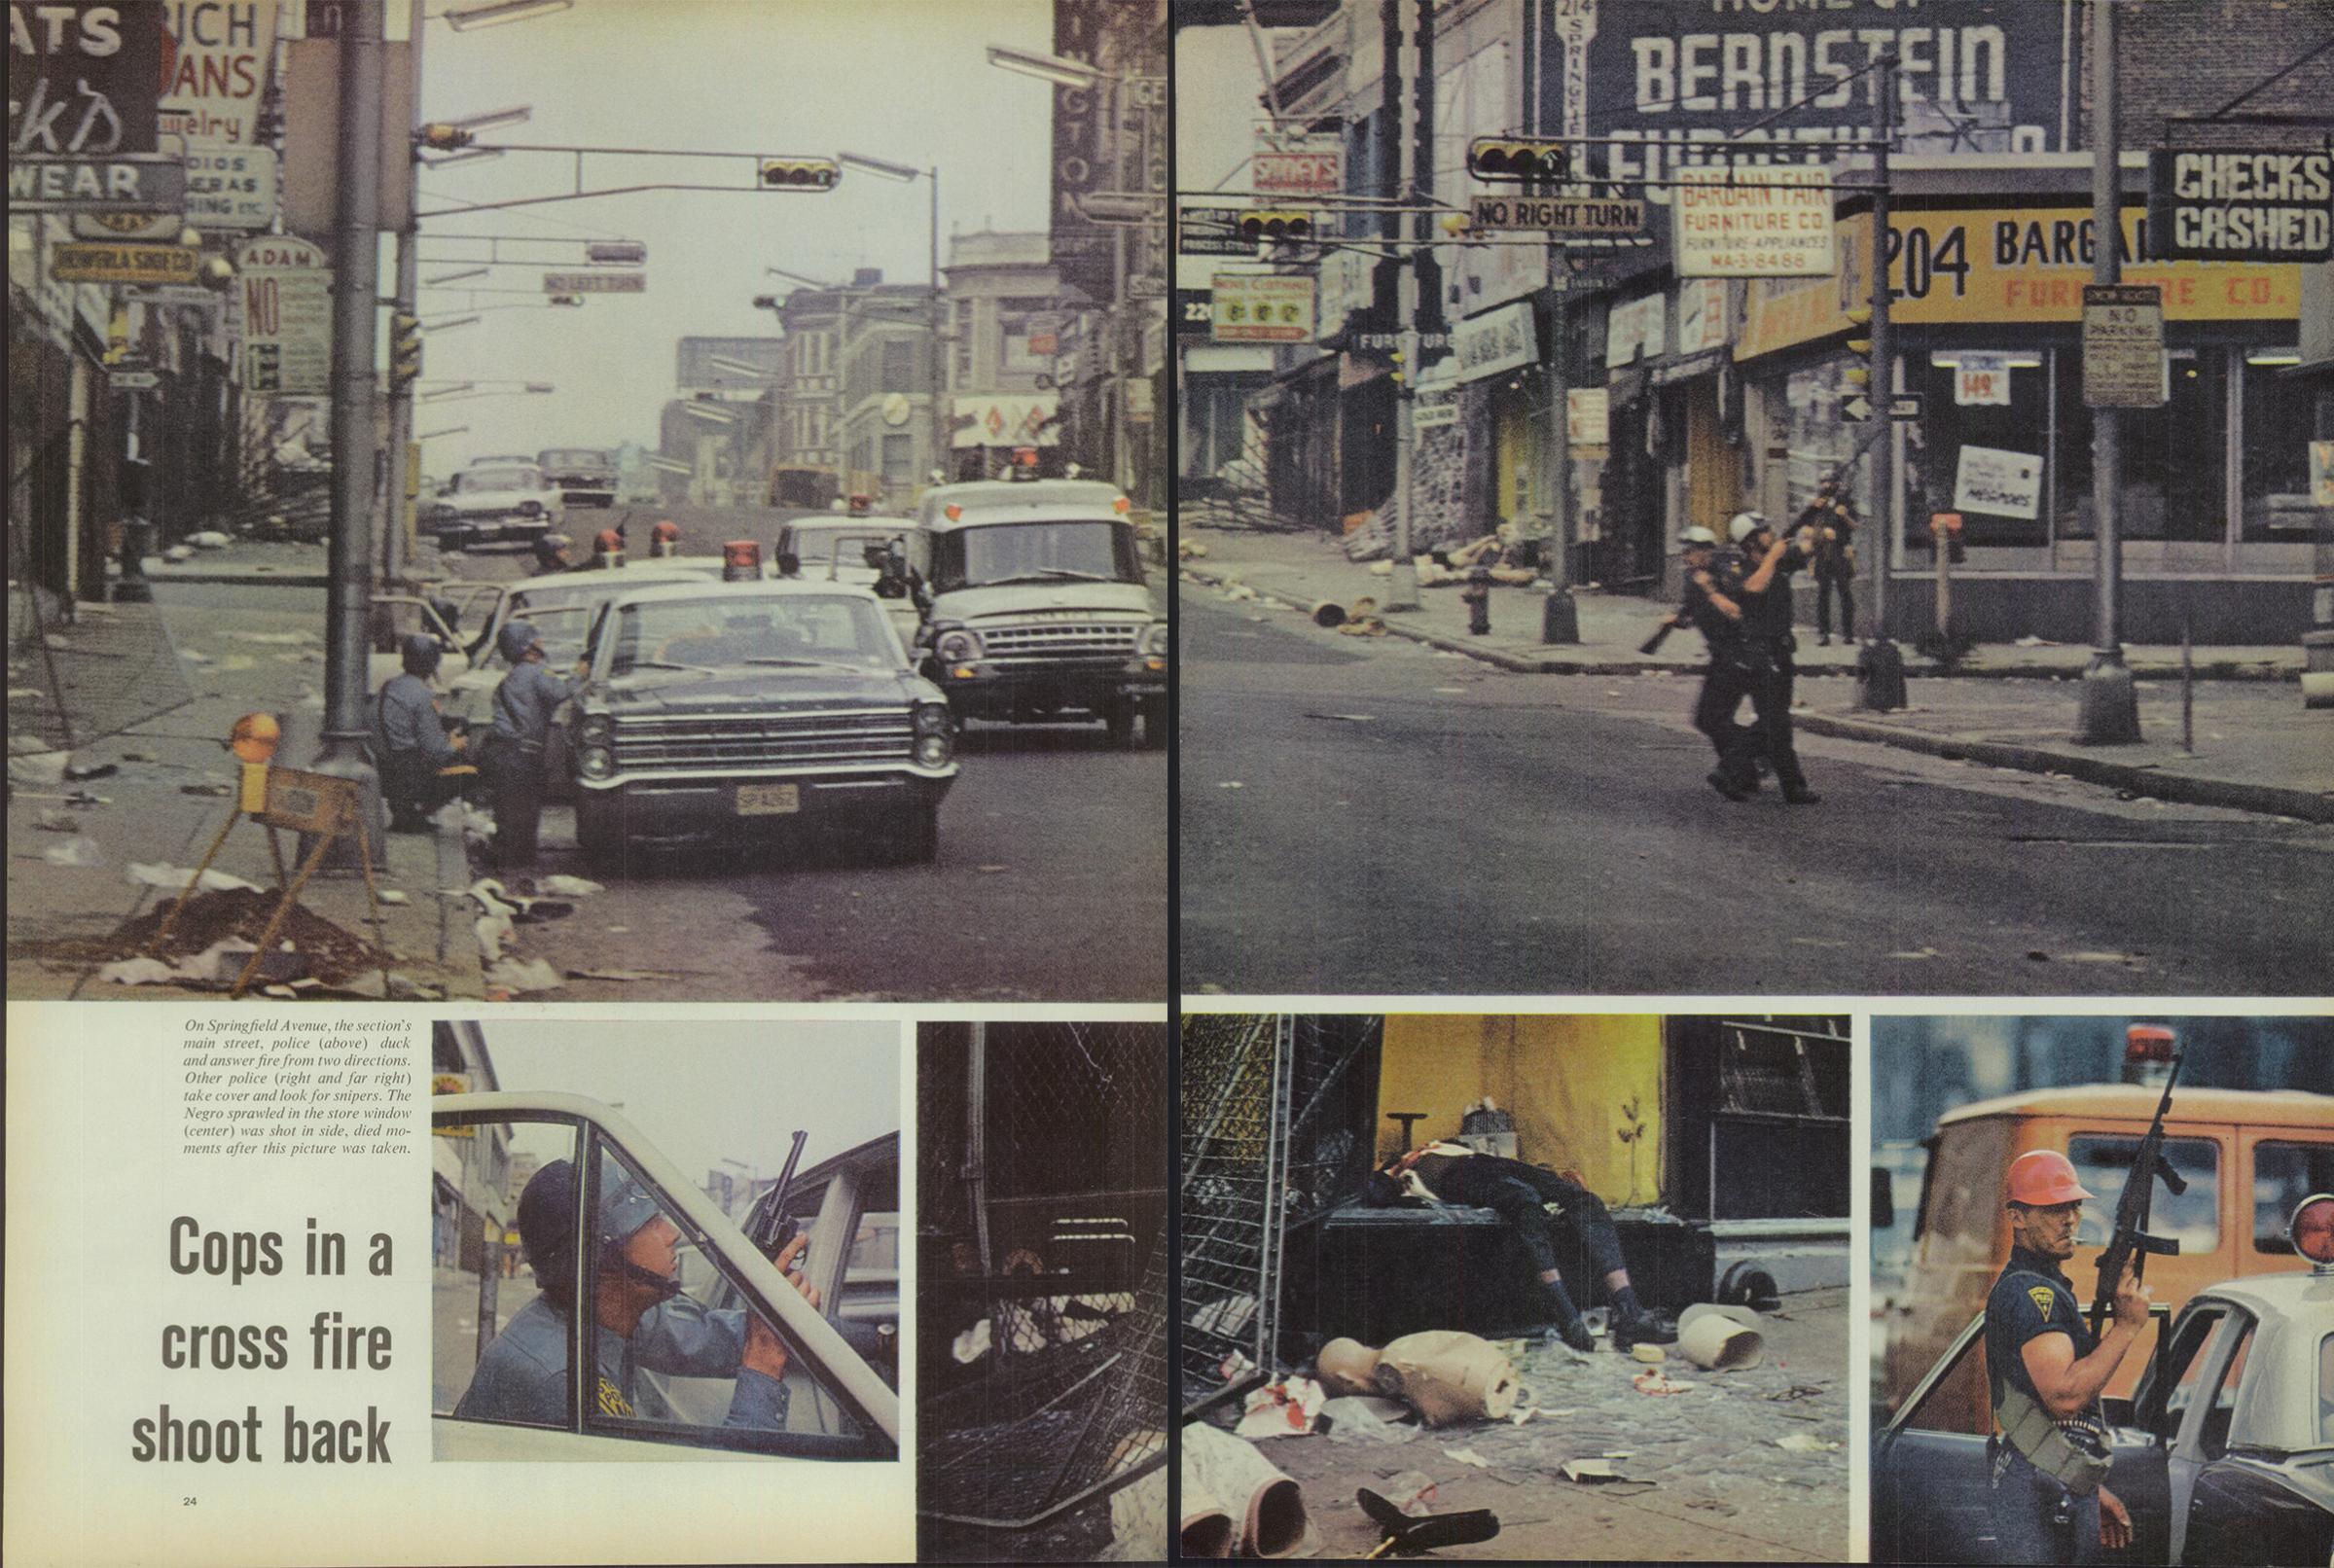 LIFE coverage of the Newark riots from the July 28, 1967 issue. Photos by Frank Dandridge and Bob Peterson.